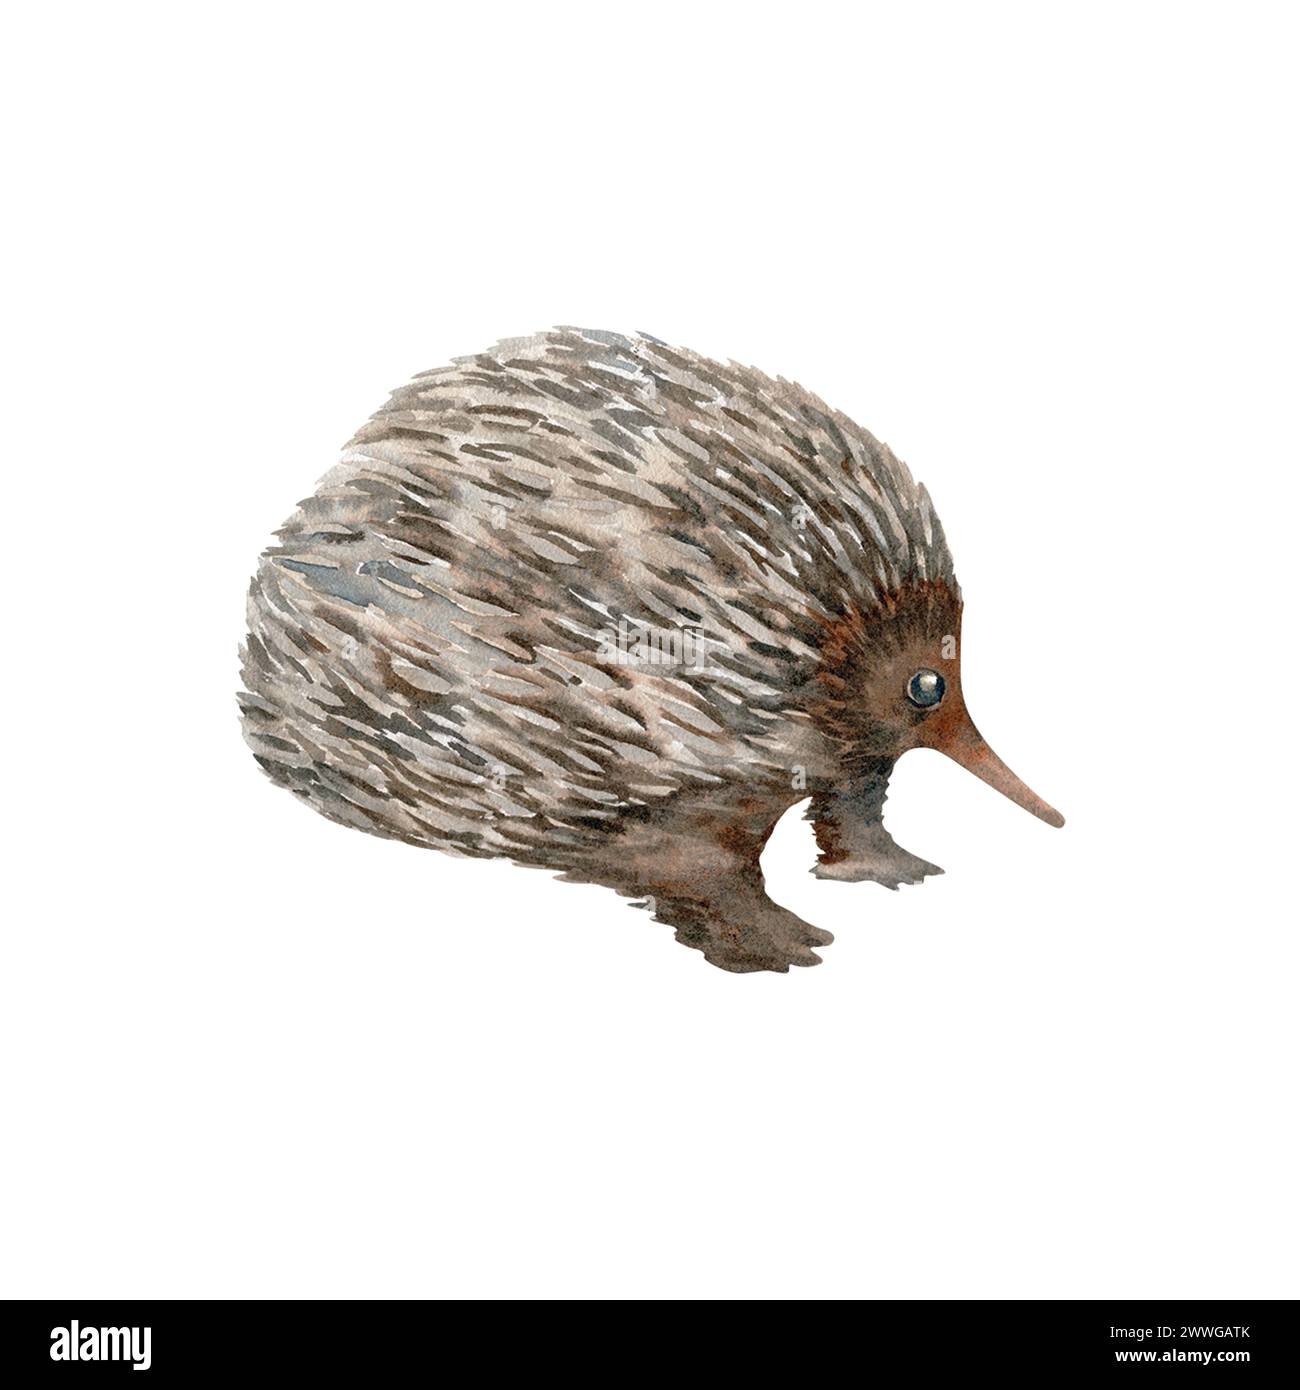 Echidna. Australian native marsupial nocturnal animal sketch. Watercolor illustration isolated on white background. Hand drawn element Stock Photo